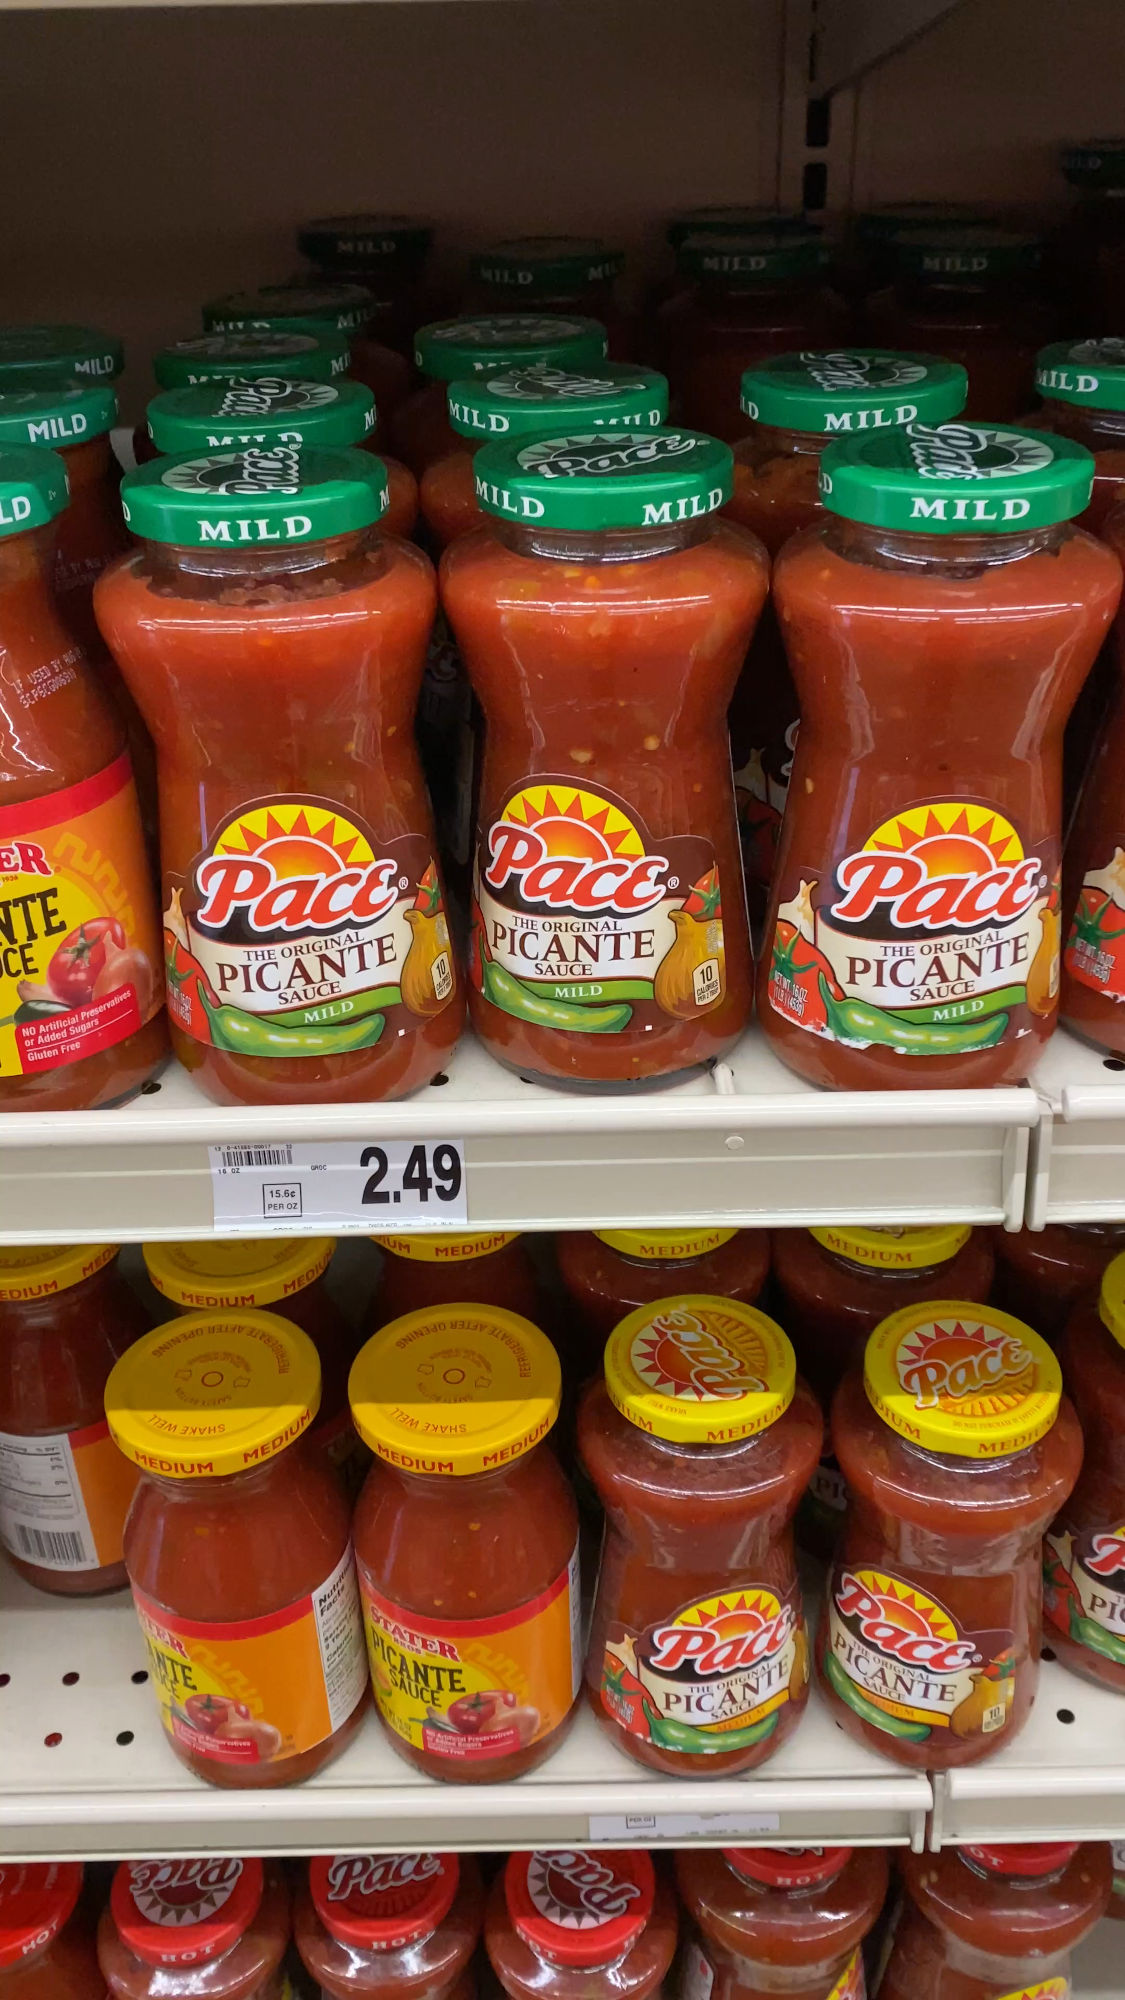 Pace Picante Sauce Stater Bros $2.49